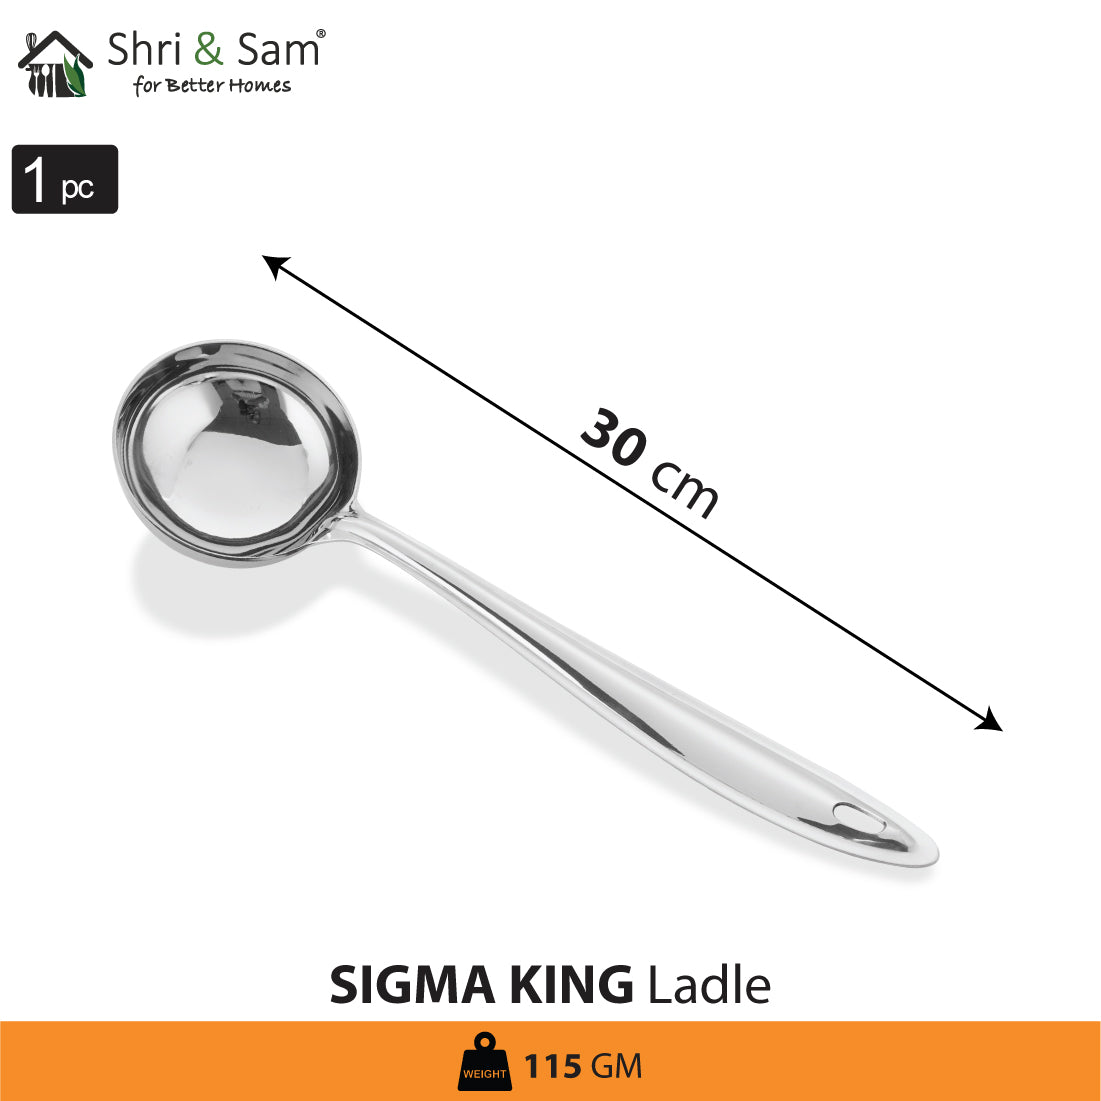 Stainless Steel Ladle Sigma King